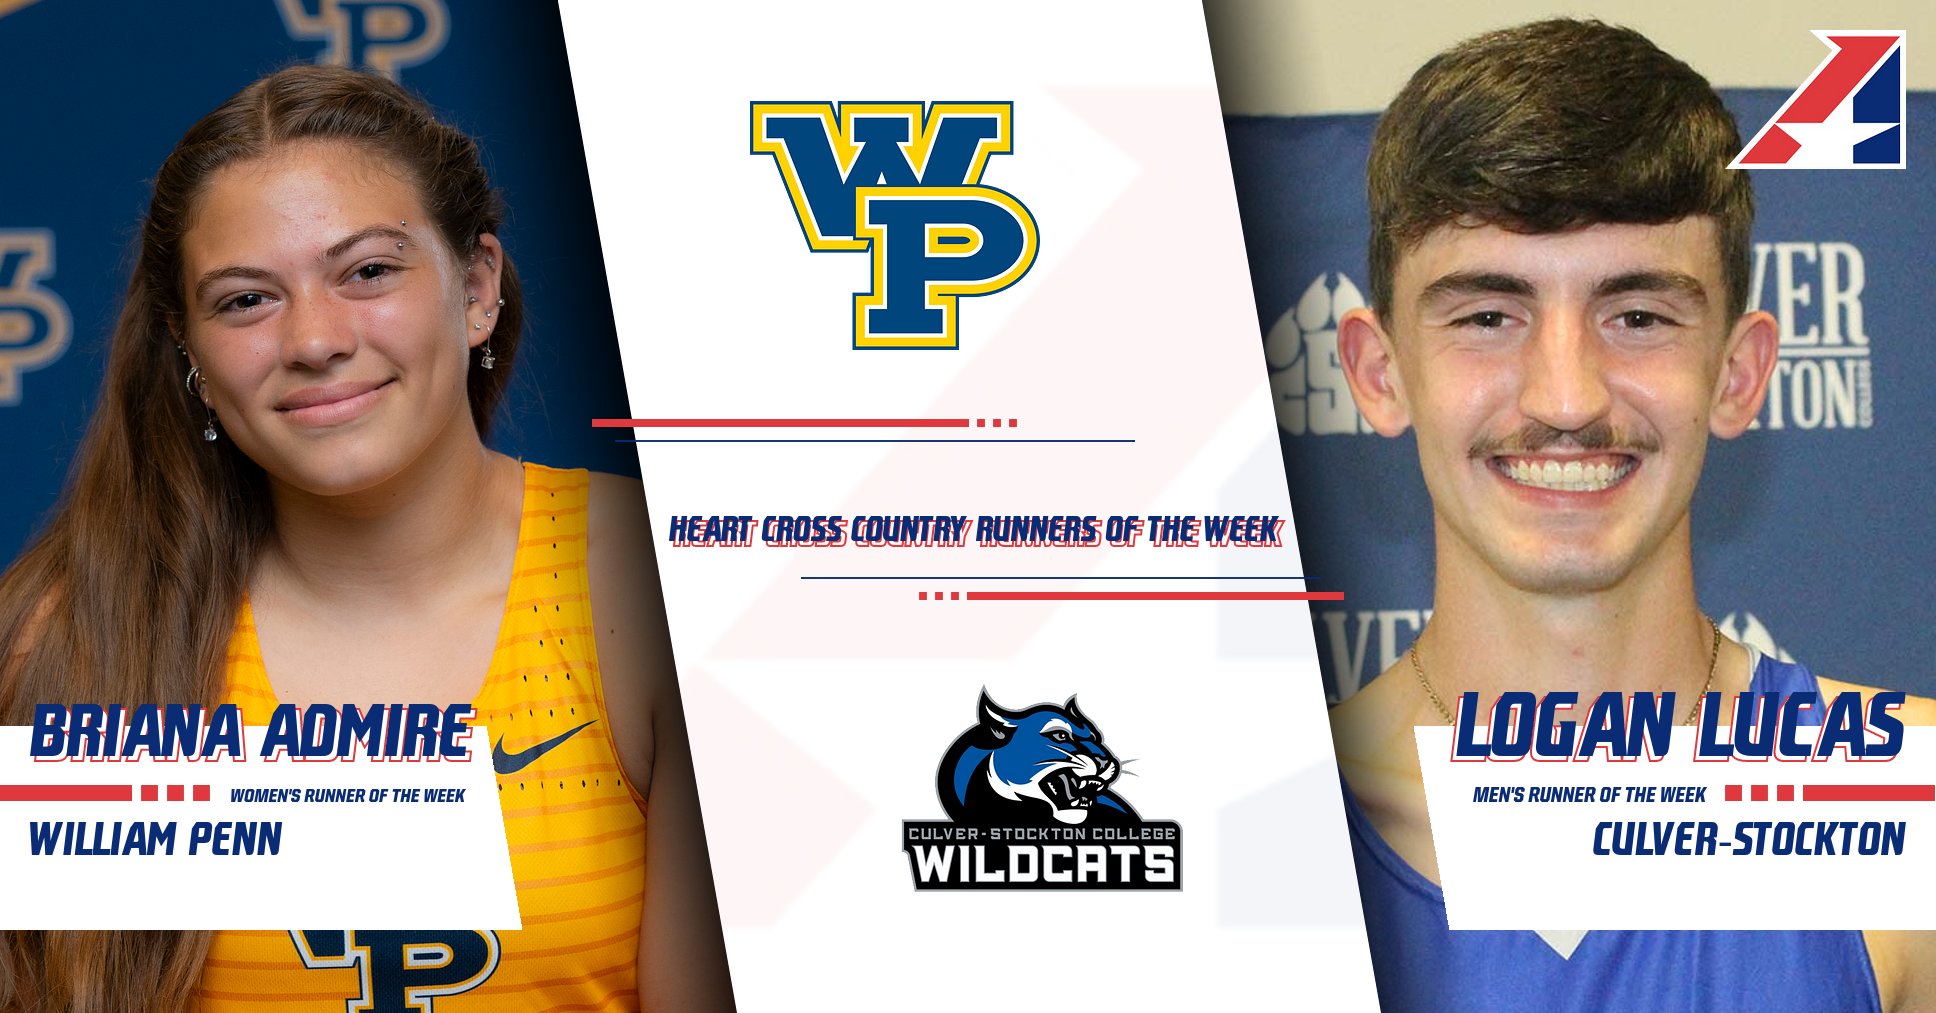 Heart Cross Country Runners of the Week Revealed